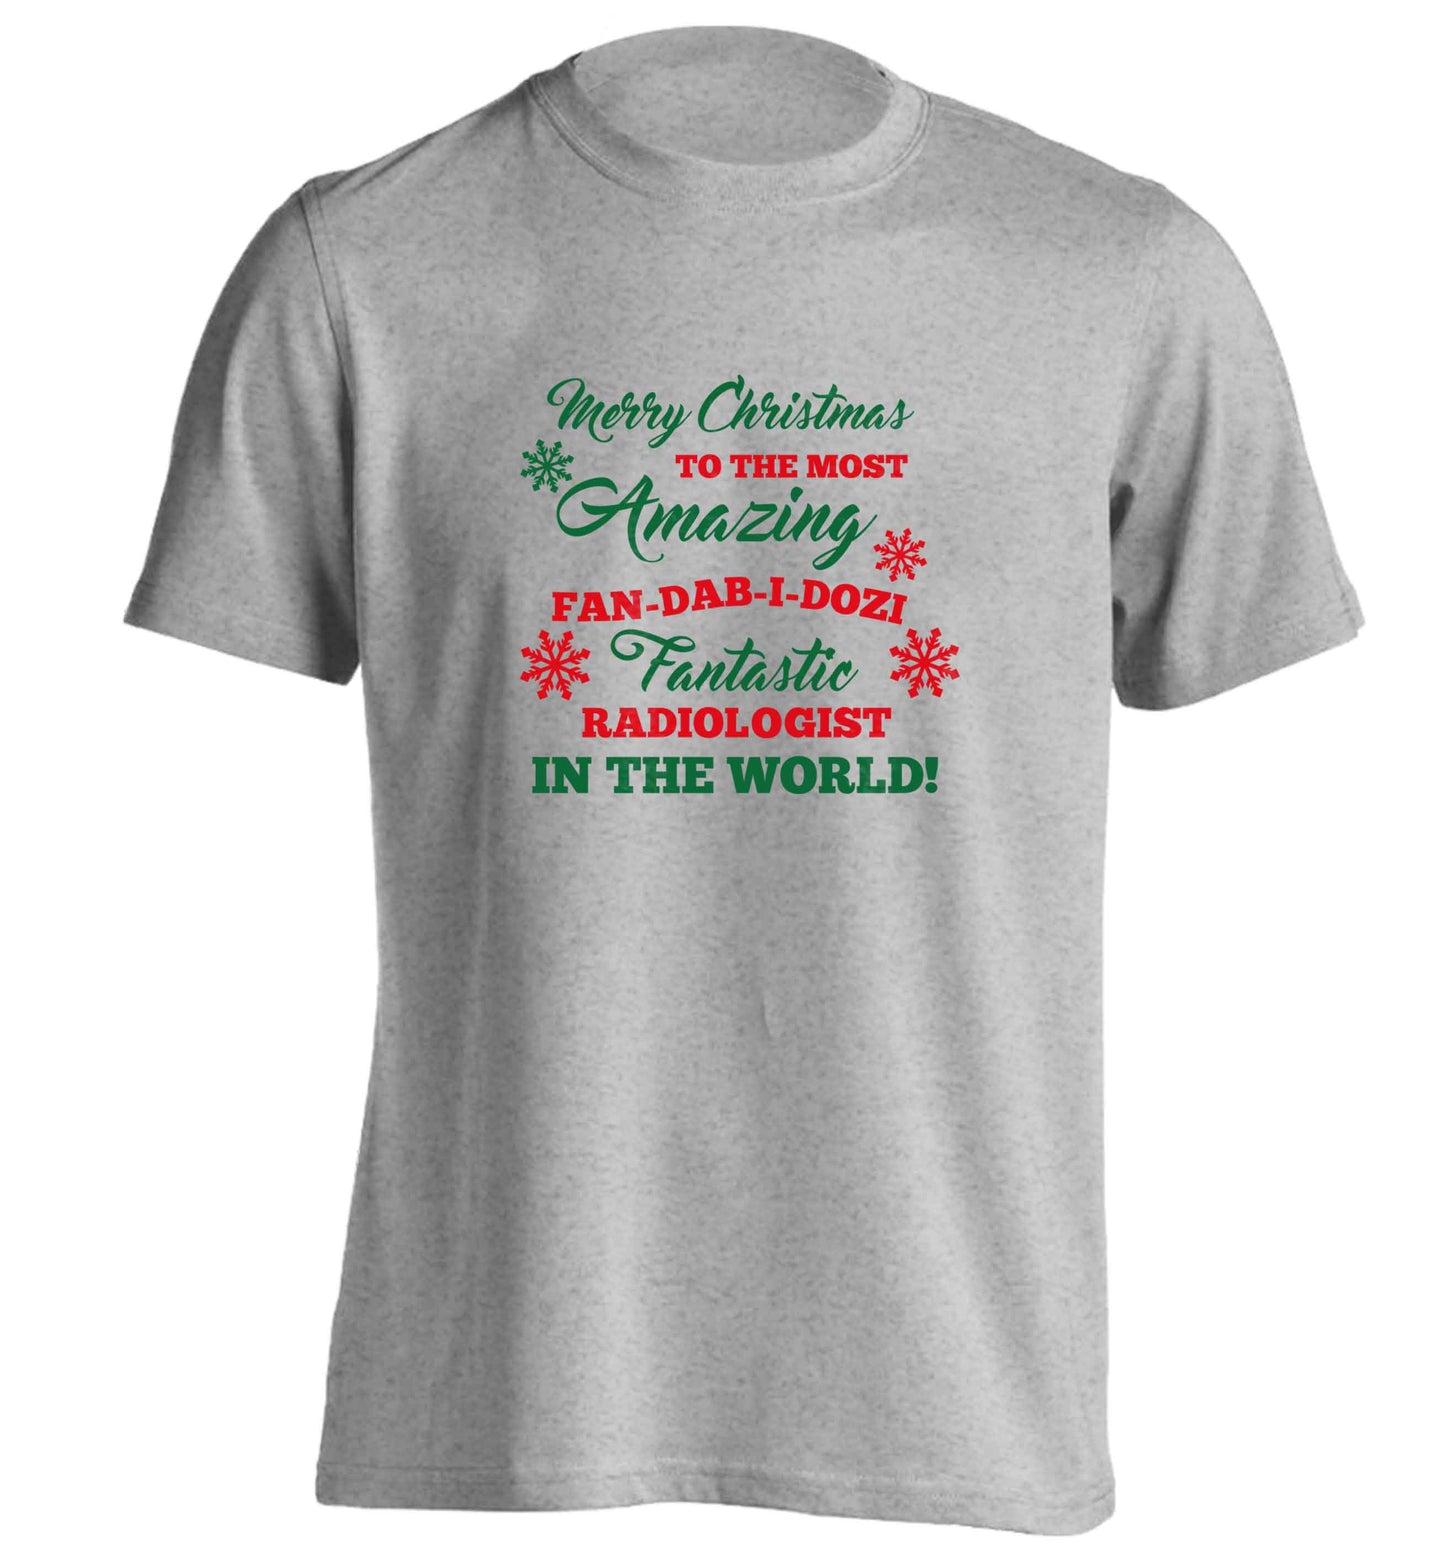 Merry Christmas to the most amazing radiologist in the world! adults unisex grey Tshirt 2XL